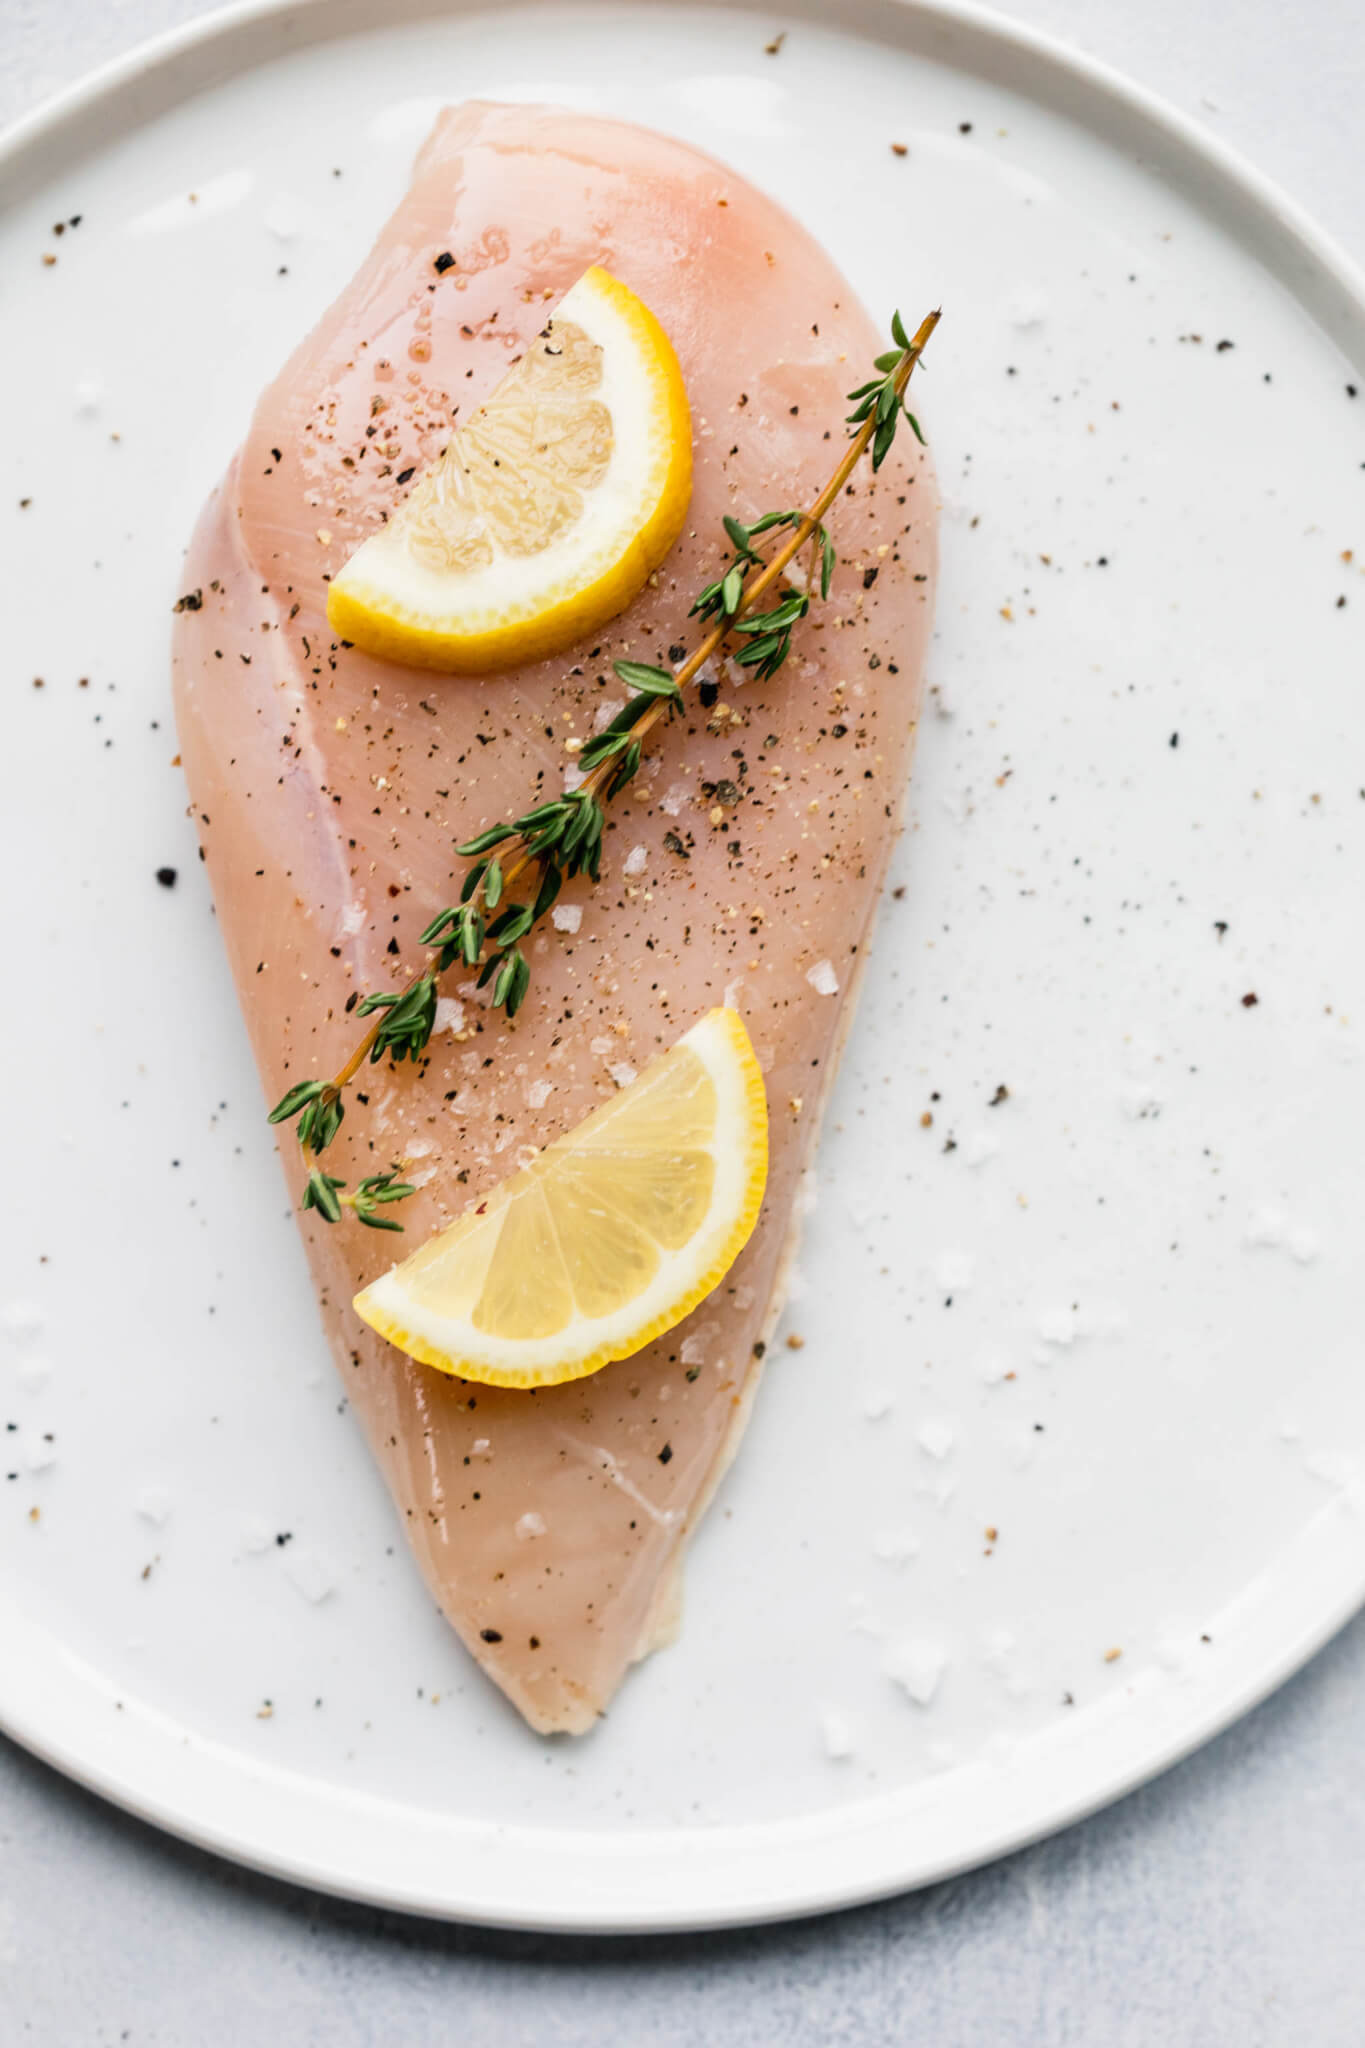 Uncooked chicken breast on small white plated topped with thyme sprigs and lemon slices.